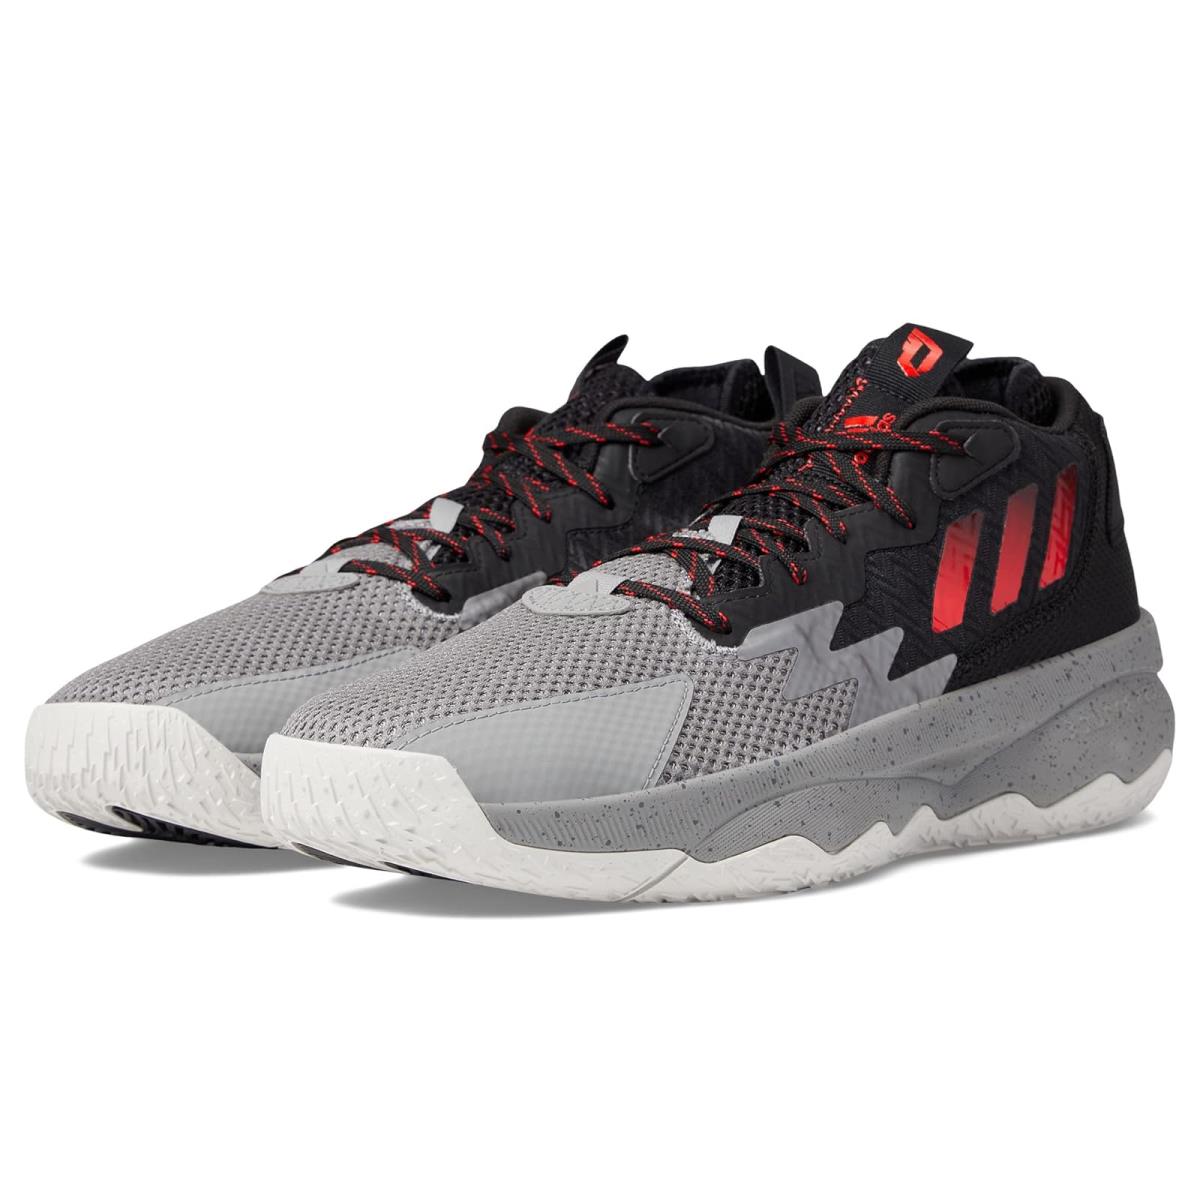 Unisex Sneakers Athletic Shoes Adidas Dame 8 Grey/Red/Black